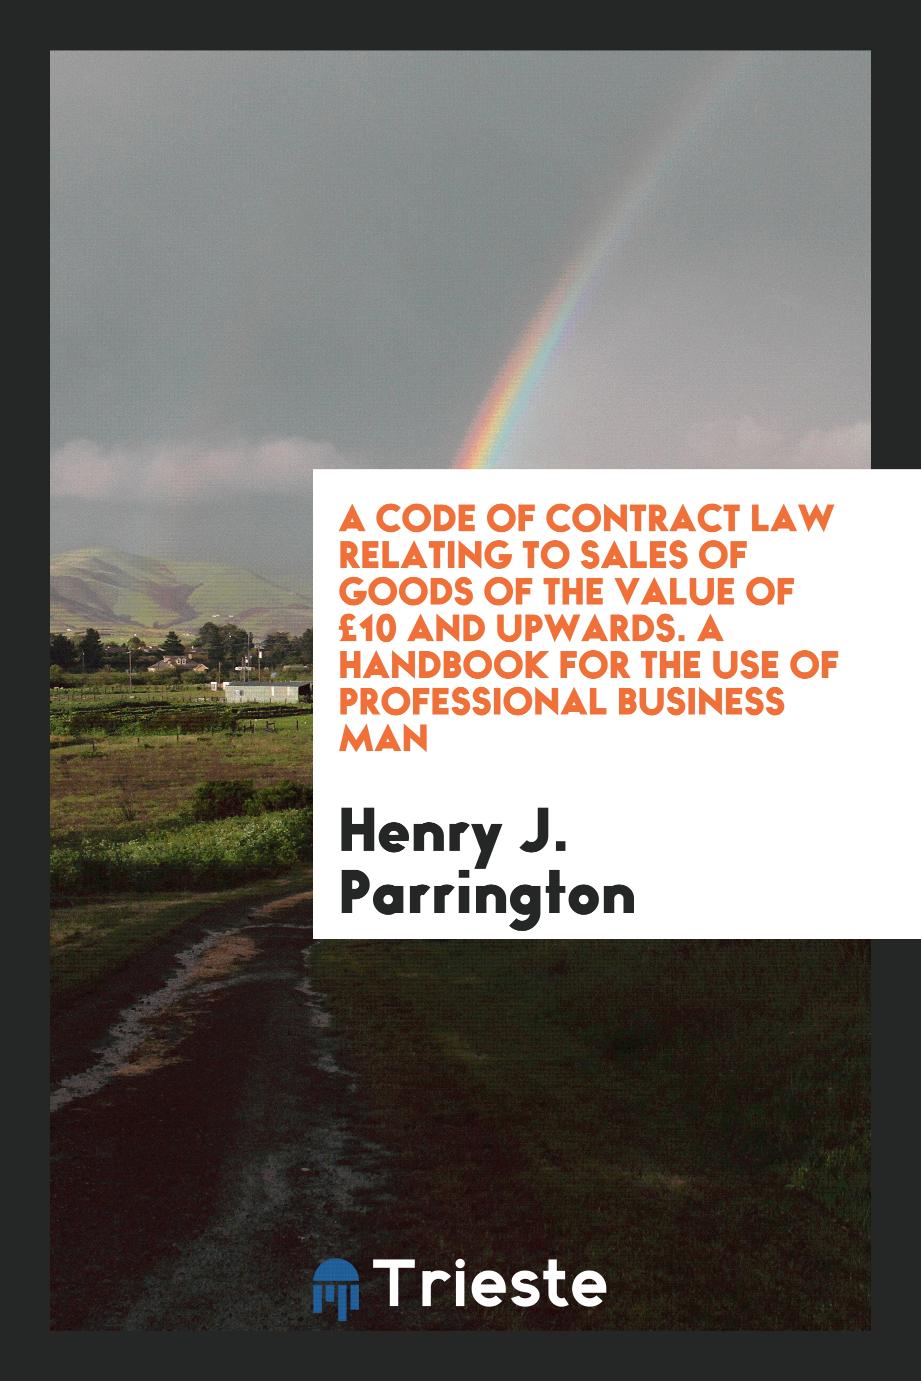 A Code of Contract Law Relating to Sales of Goods of the Value of £10 and Upwards. A Handbook for the Use of Professional Business Man